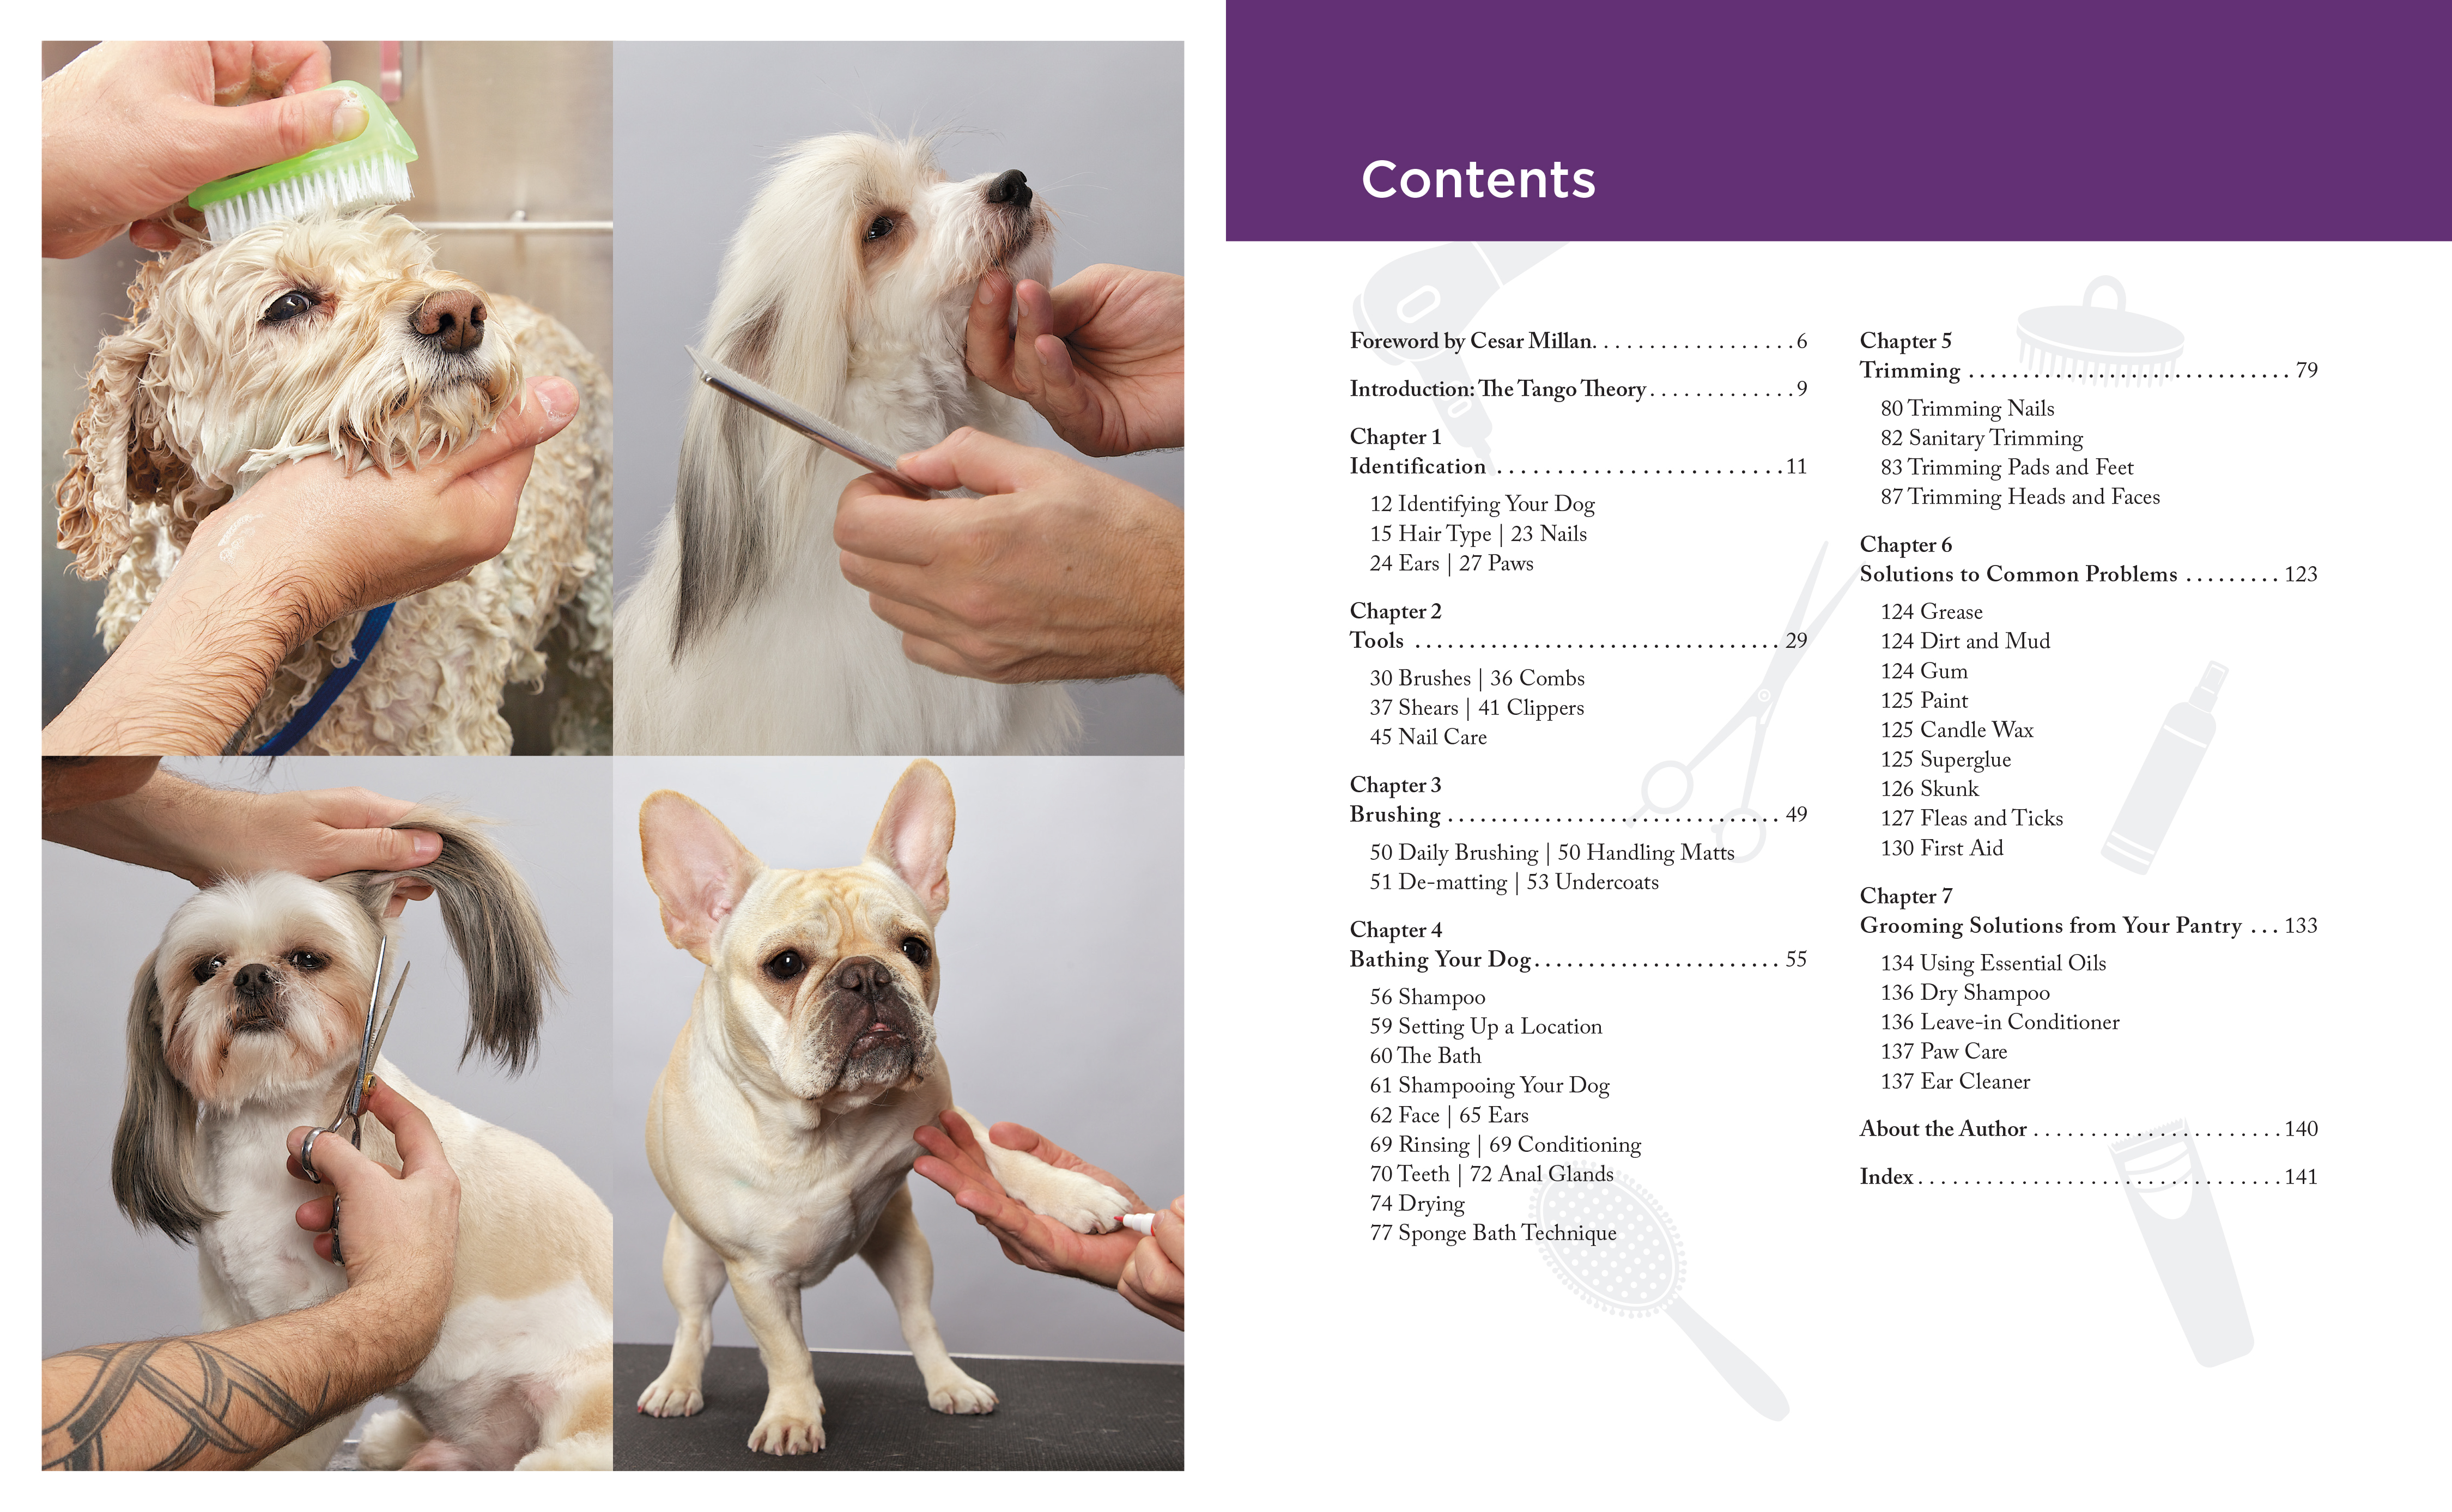 Dog Grooming for Beginners